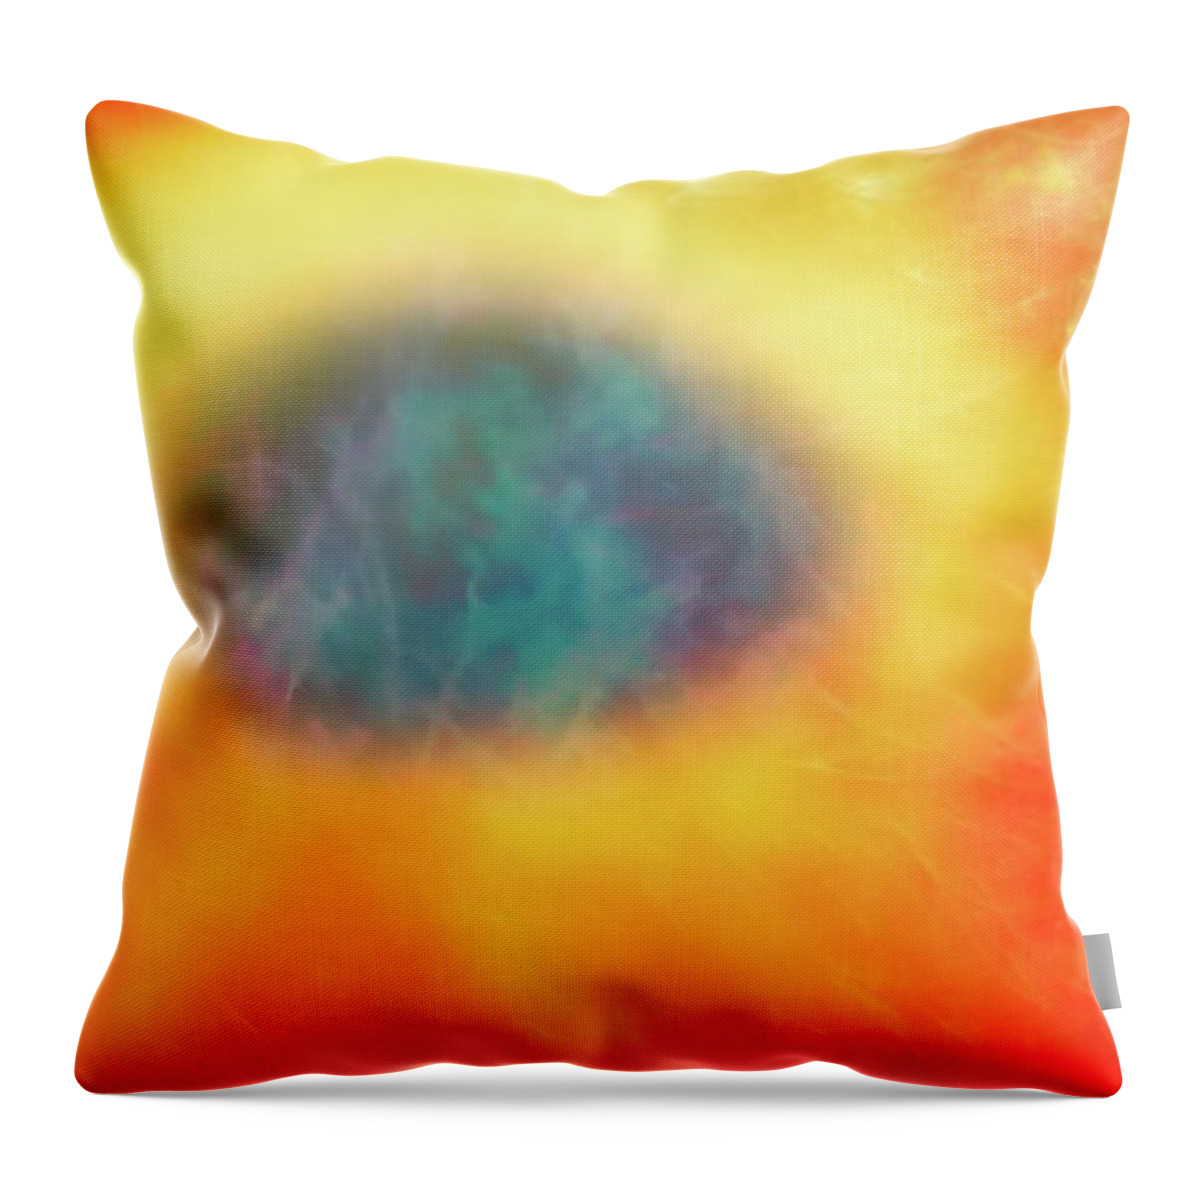 Art Throw Pillow featuring the digital art Abstract 50 by Steve DaPonte